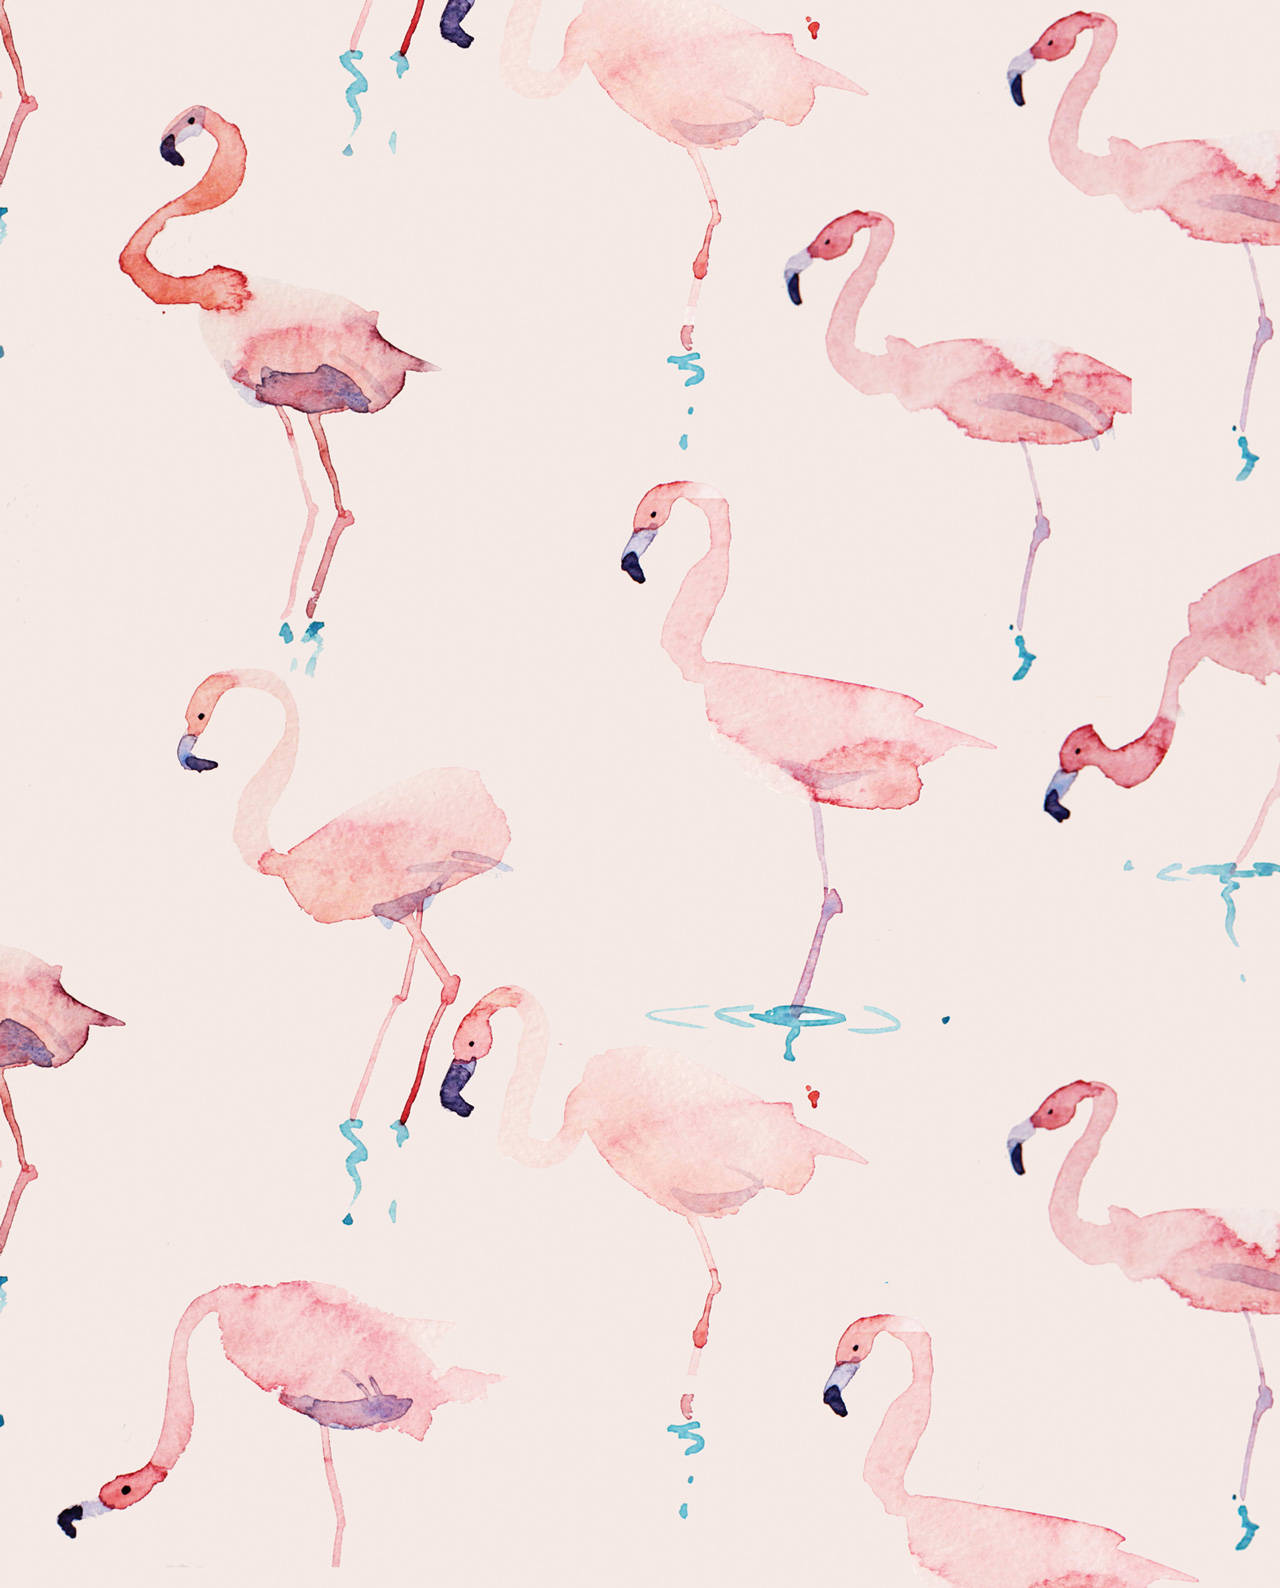 Flamingo Pattern In Watercolor Illustration Background